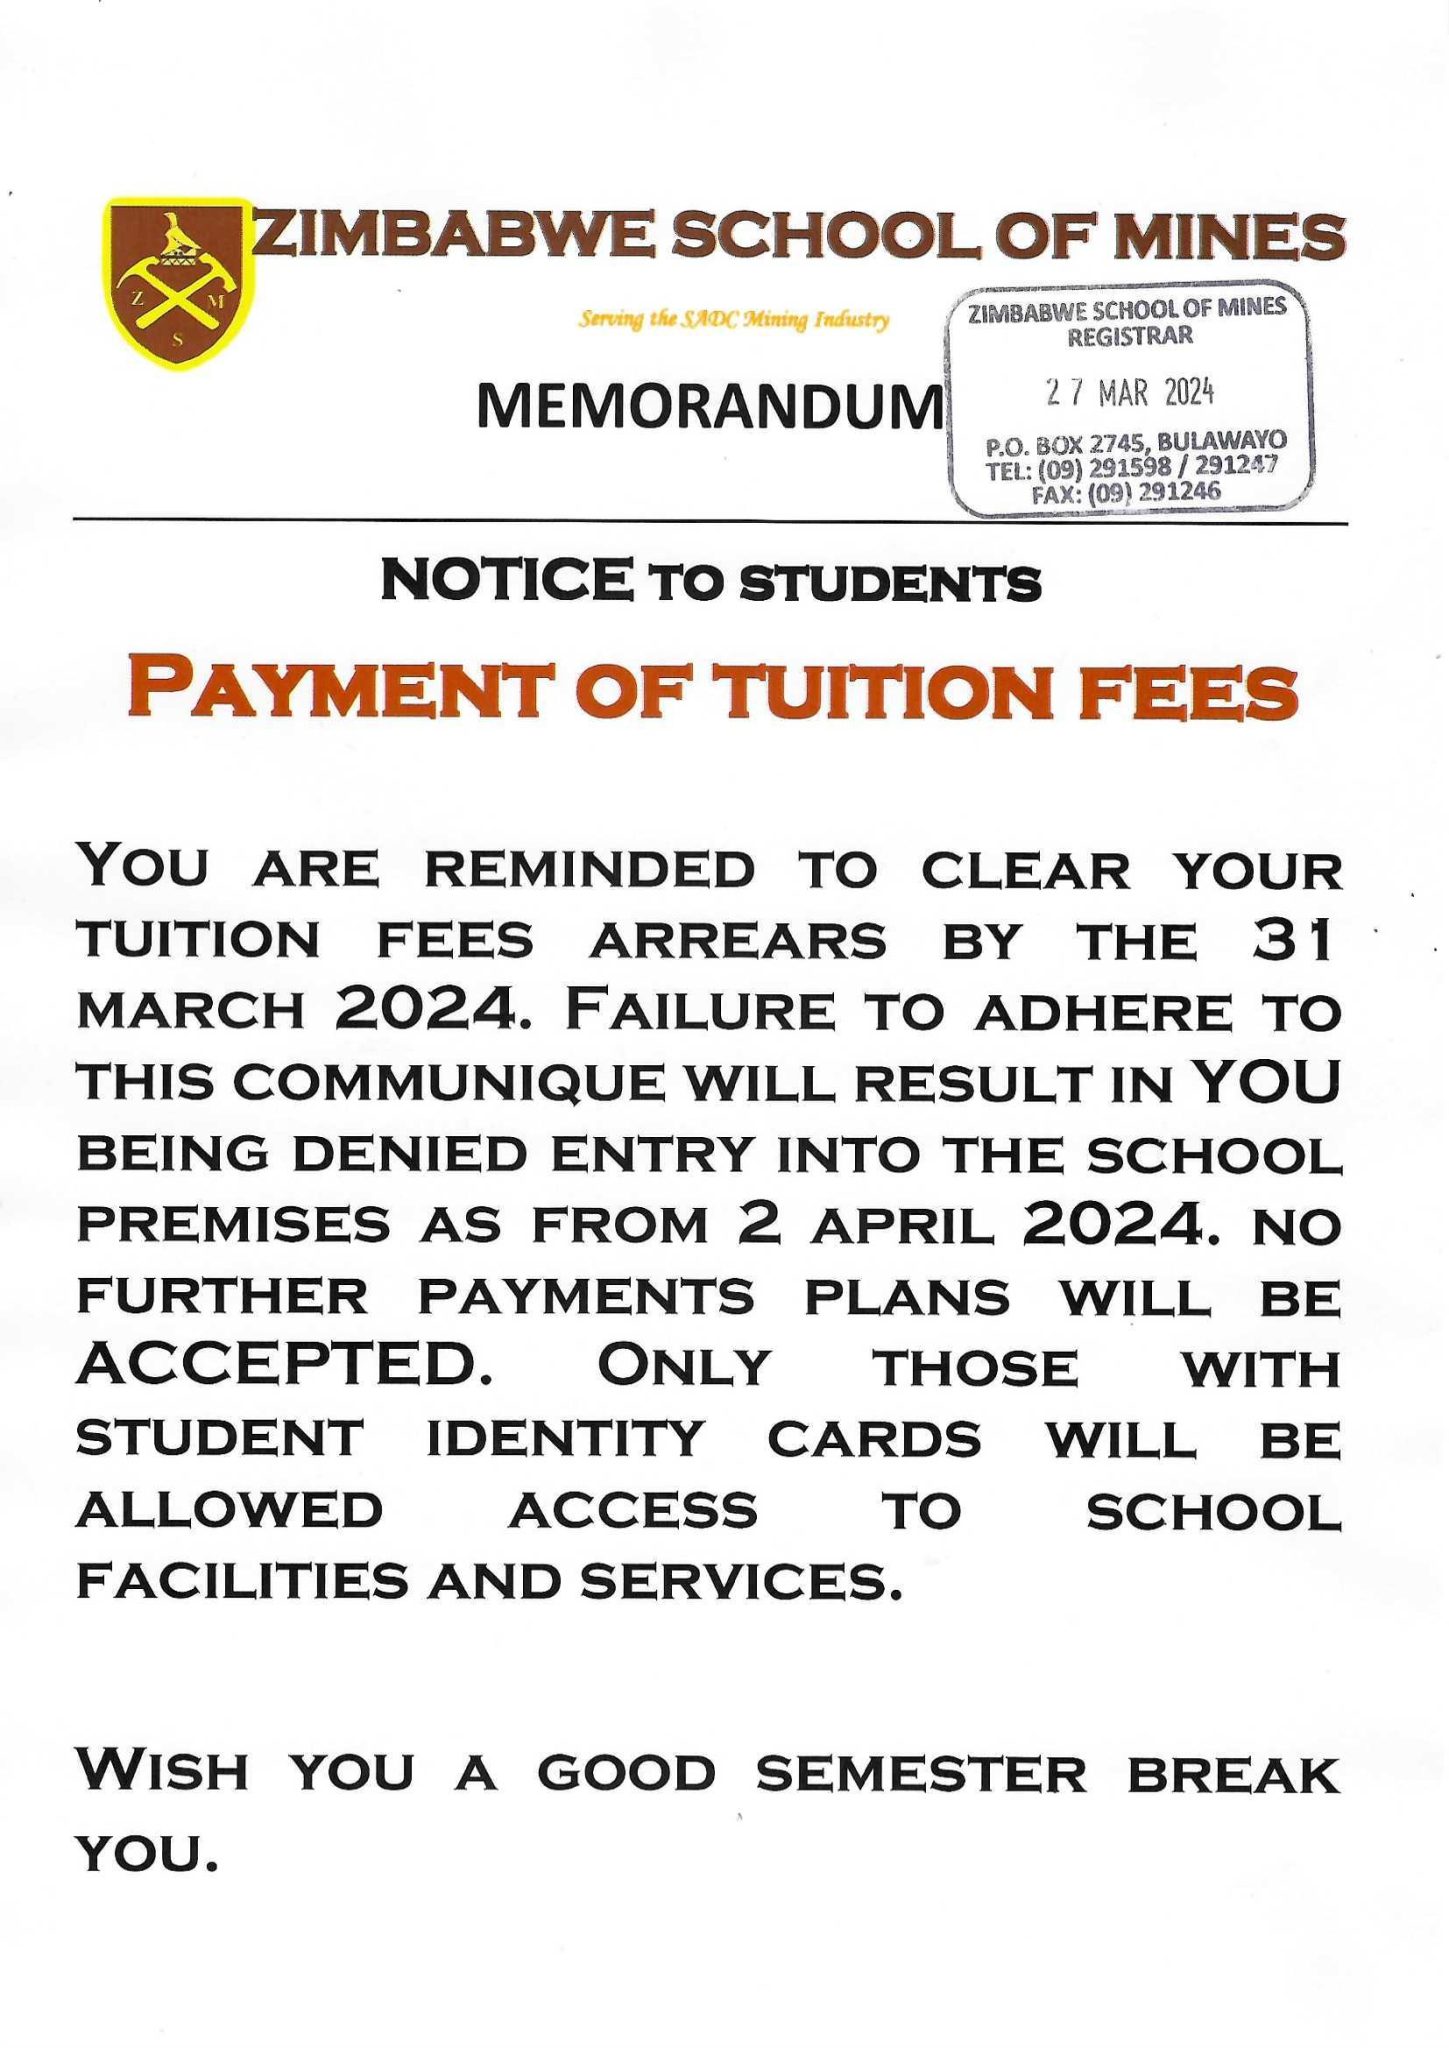 Payment of tuition fees